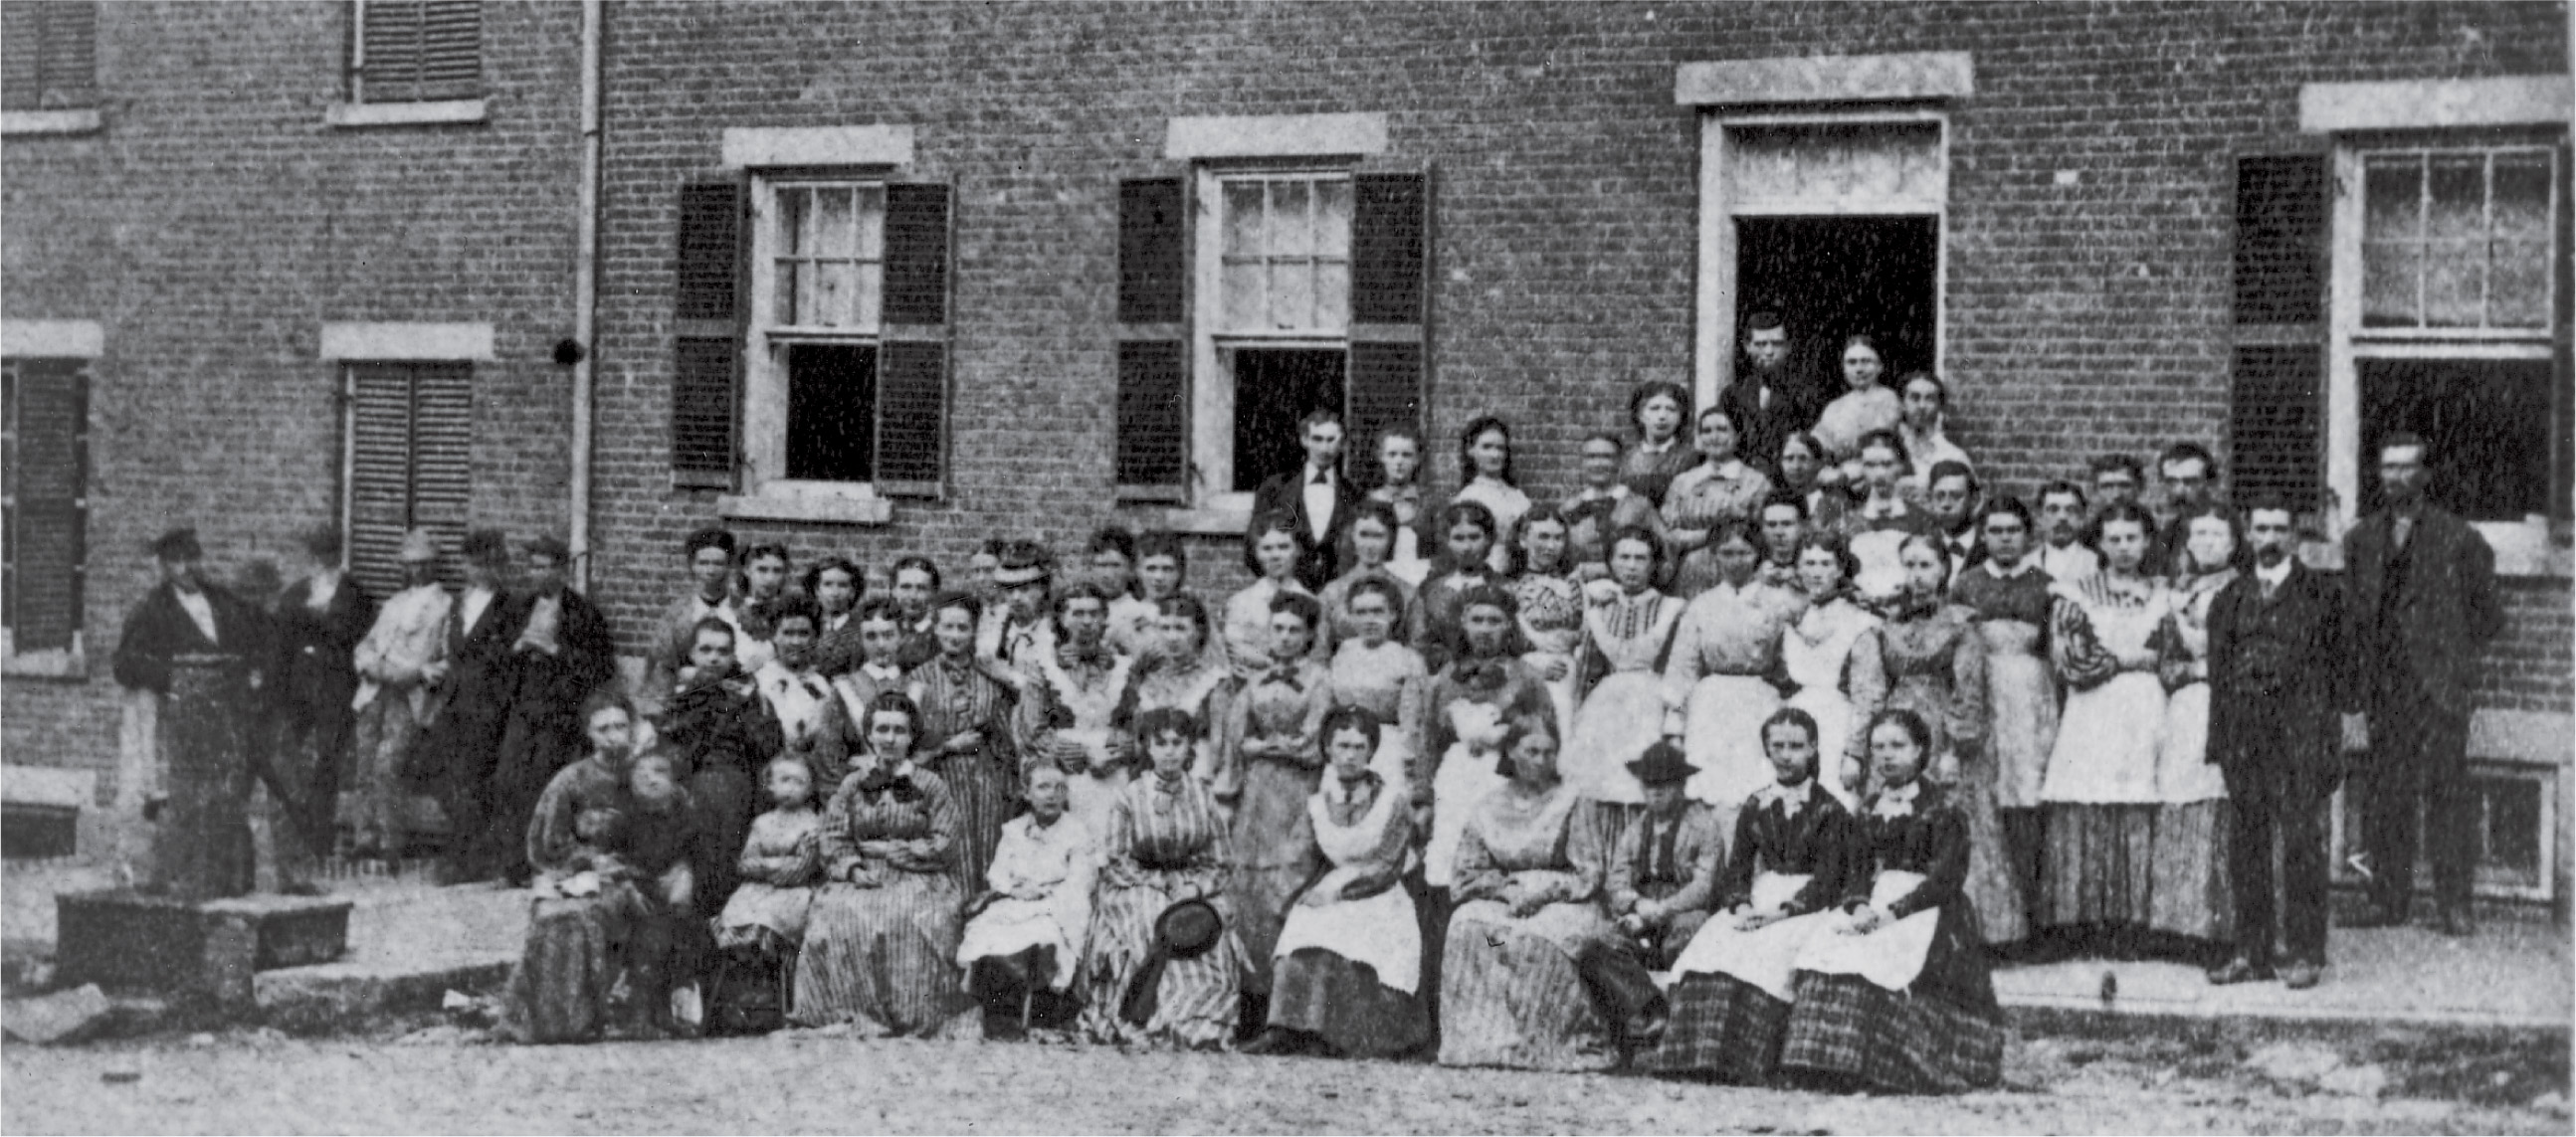 A photo shows dozens of
people posing in front of a brick boarding house.